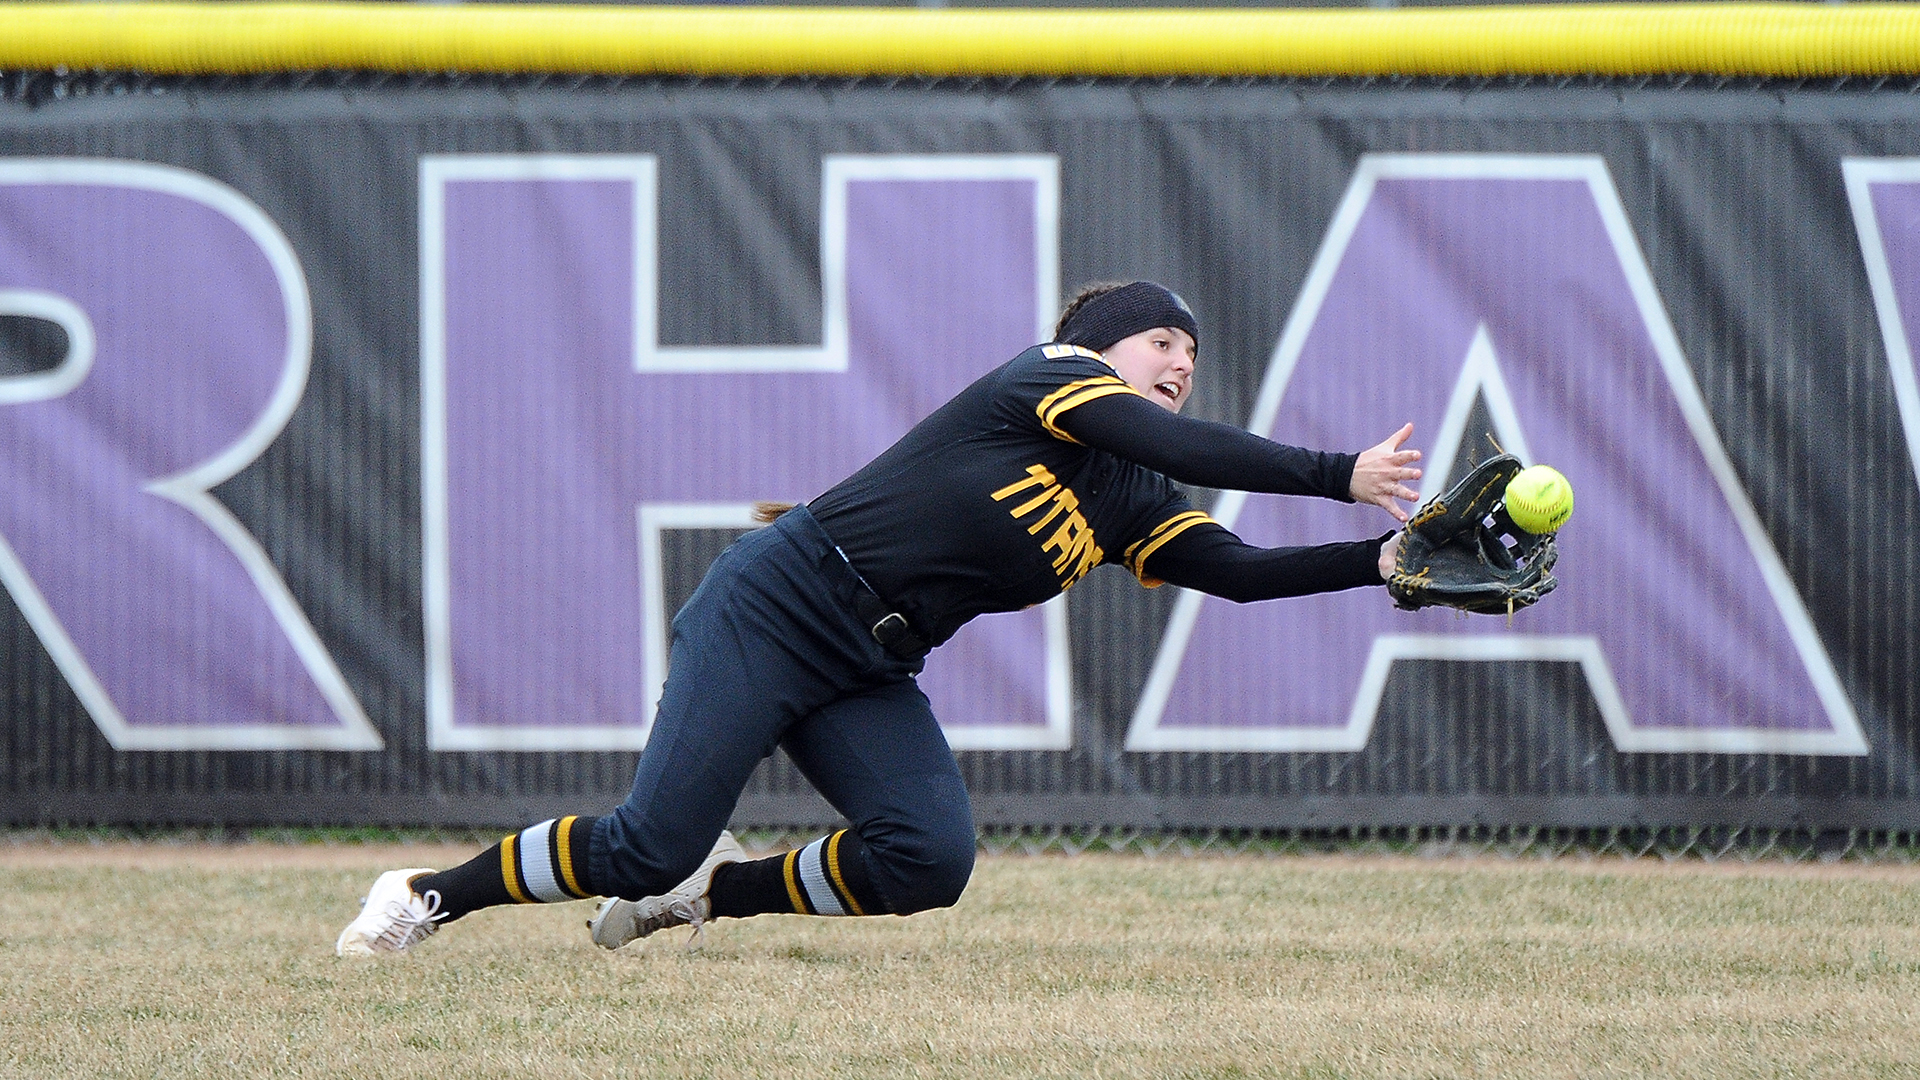 Gabby Buikema had two hits and this diving catch during the Titans' 1-0 win over the Warhawks.